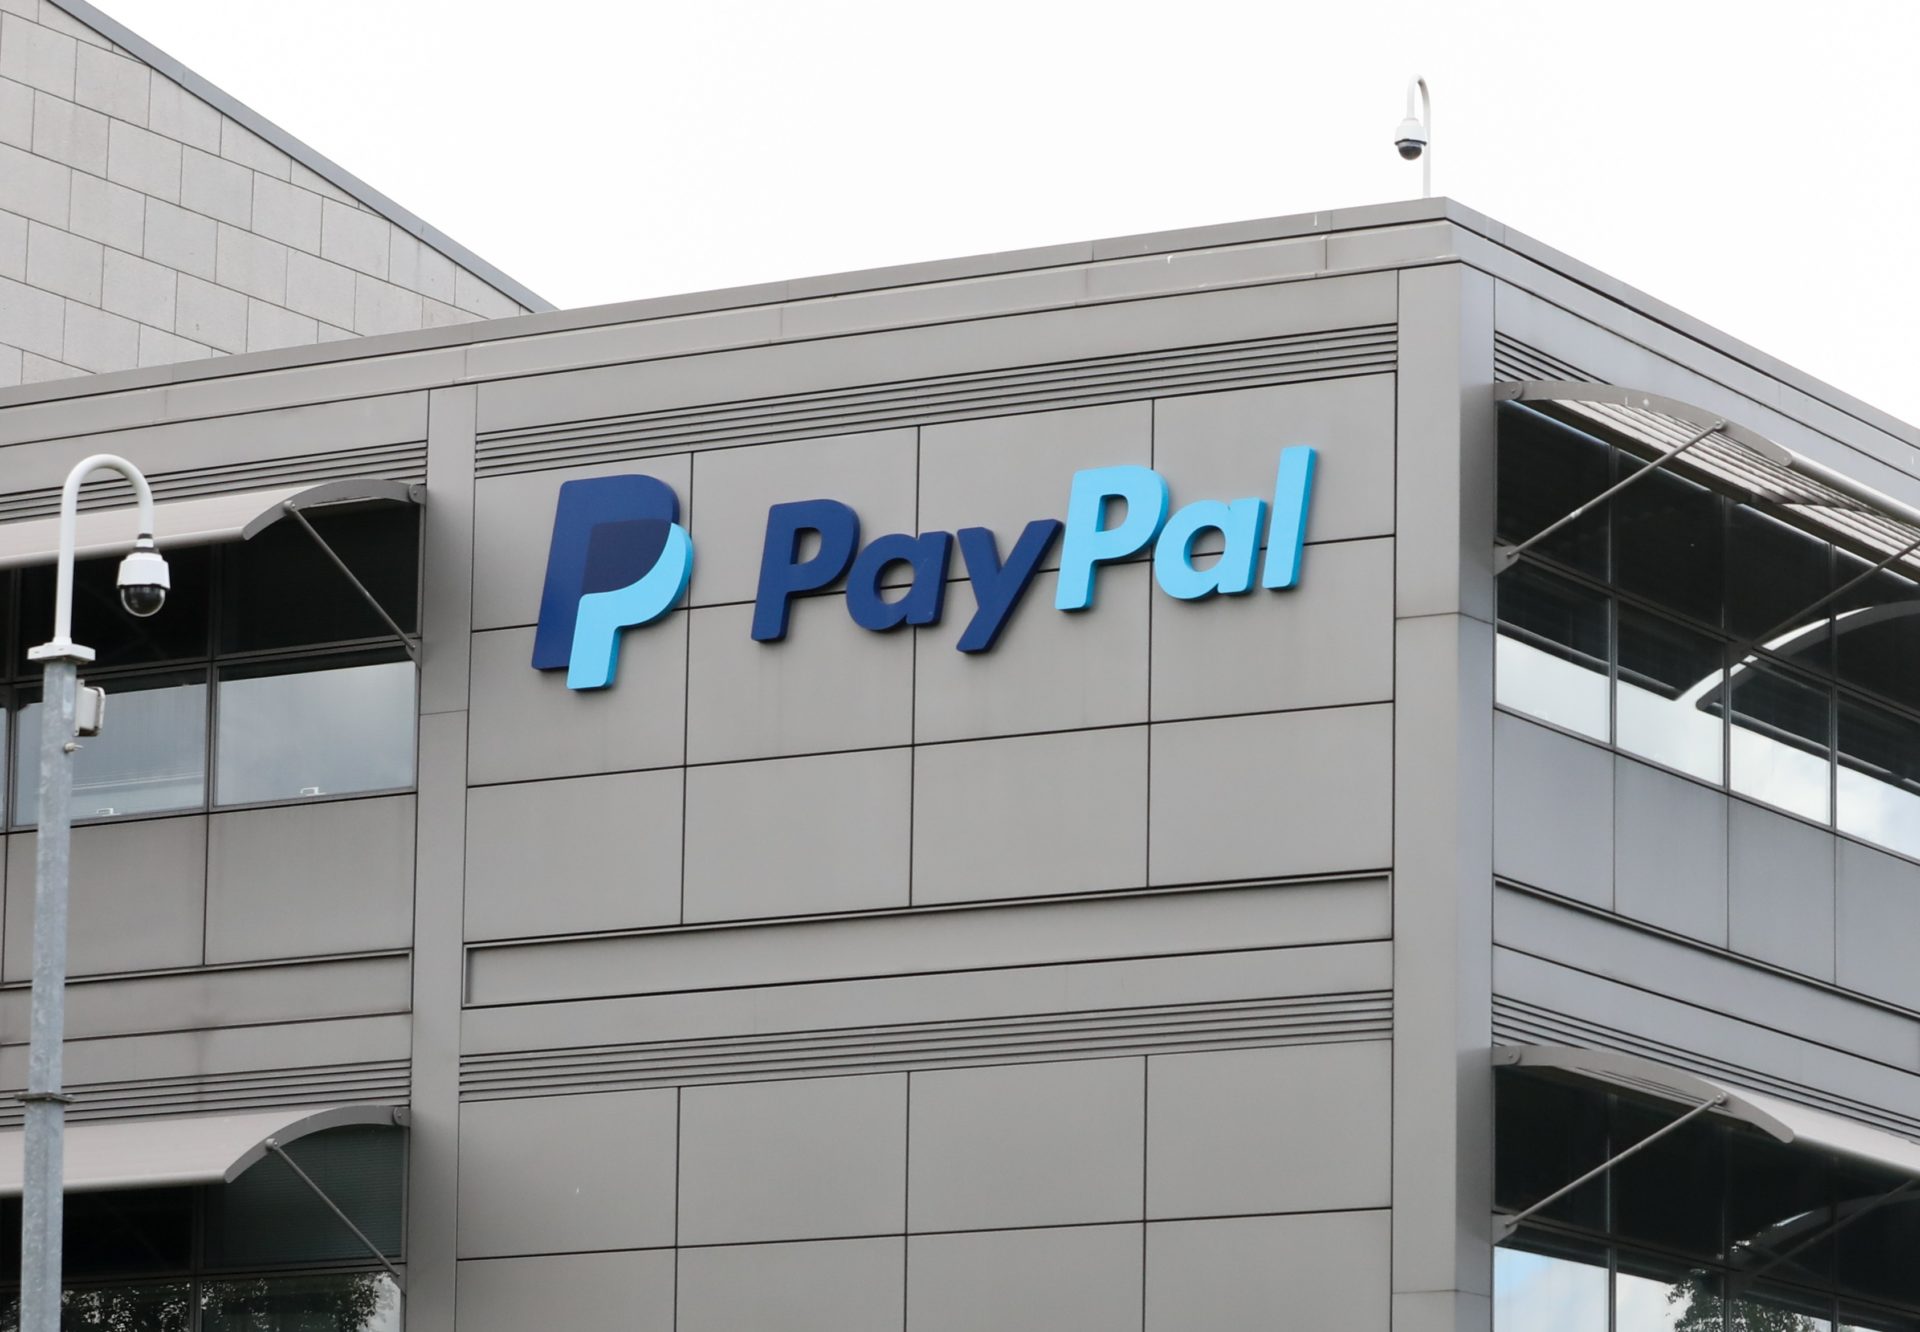 Paypal is hiring for the position of Data Scientist | Apply here!